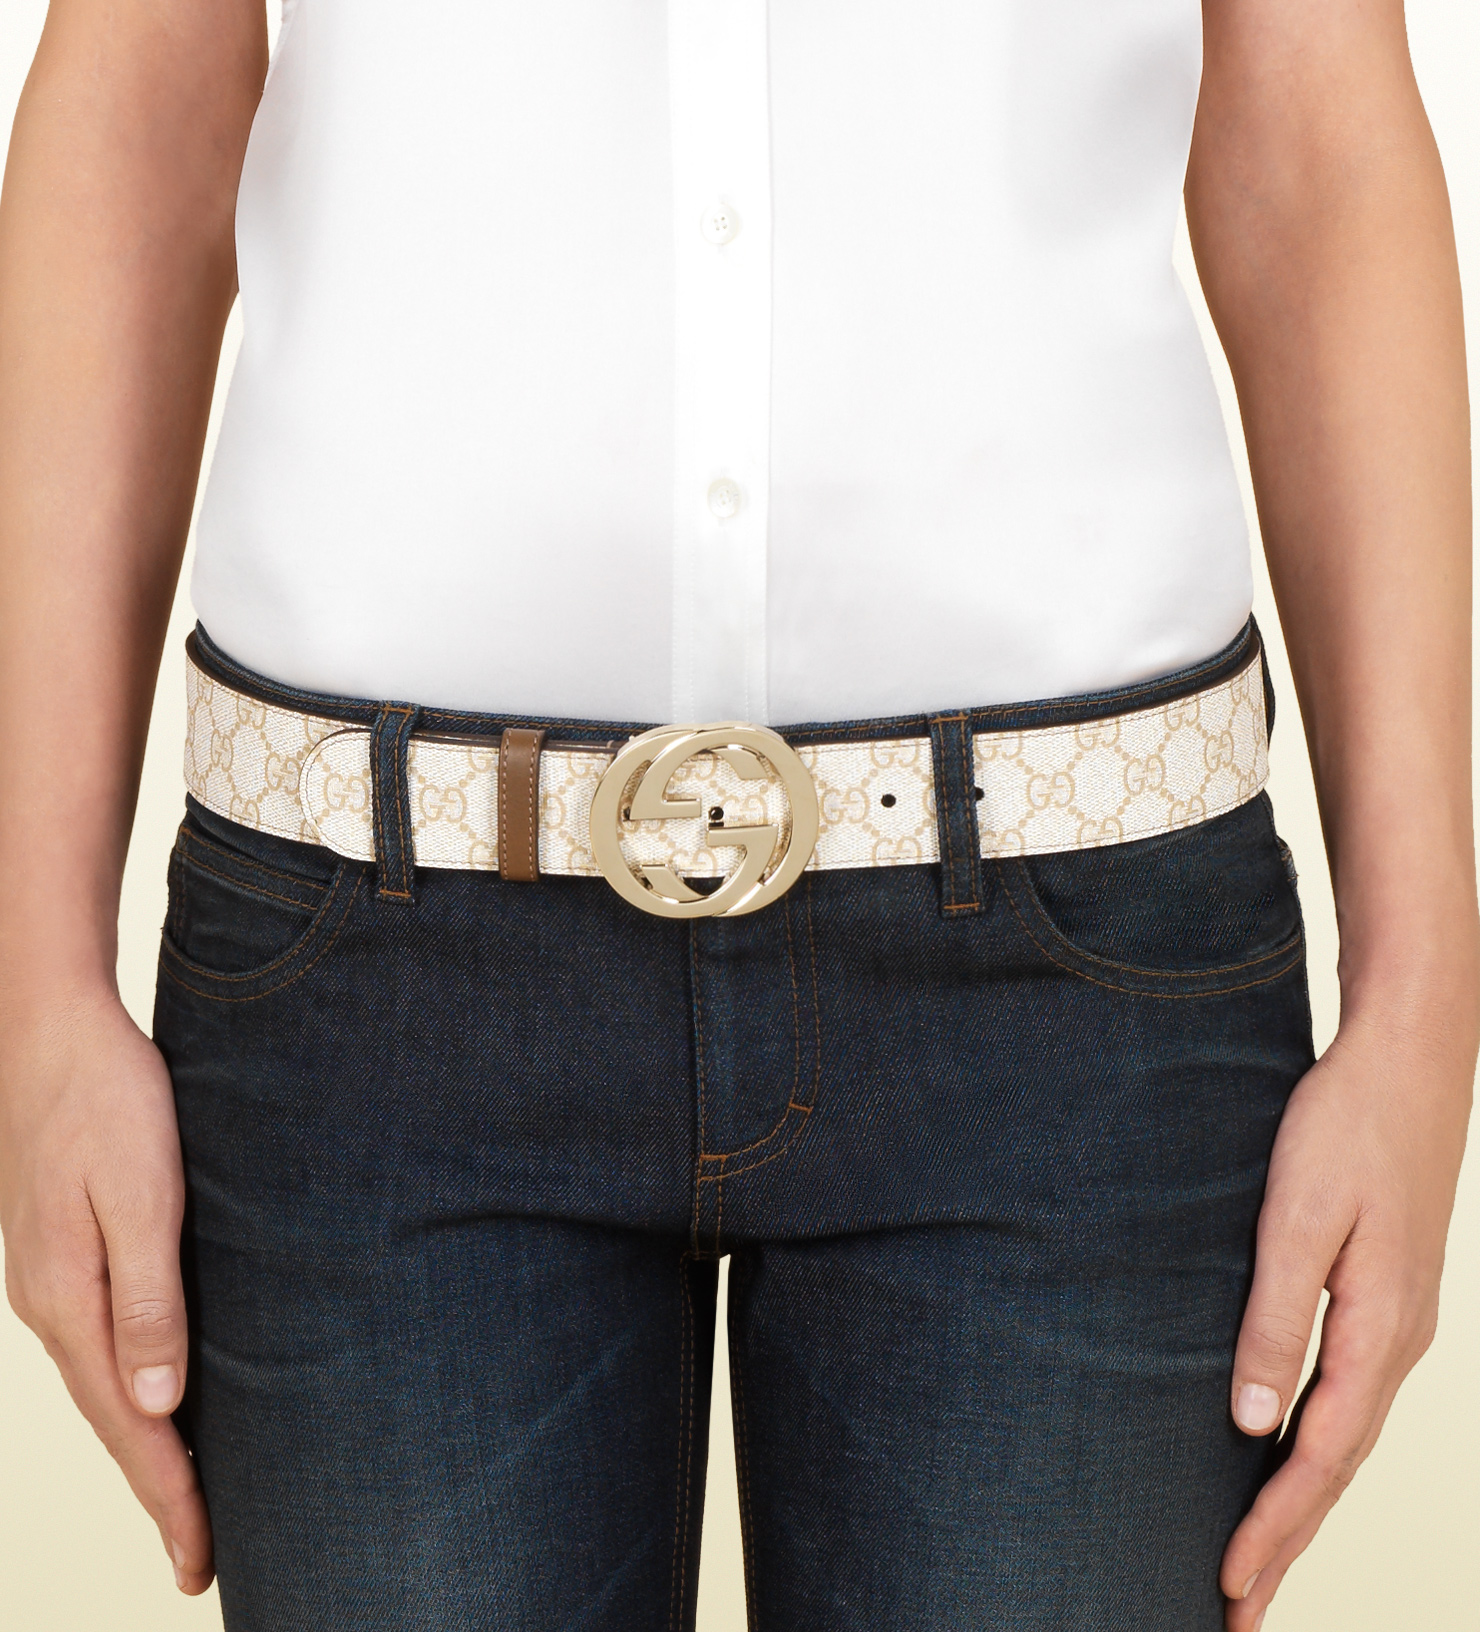 Lyst - Gucci Gg Supreme Canvas Belt with Interlocking G Buckle in Natural